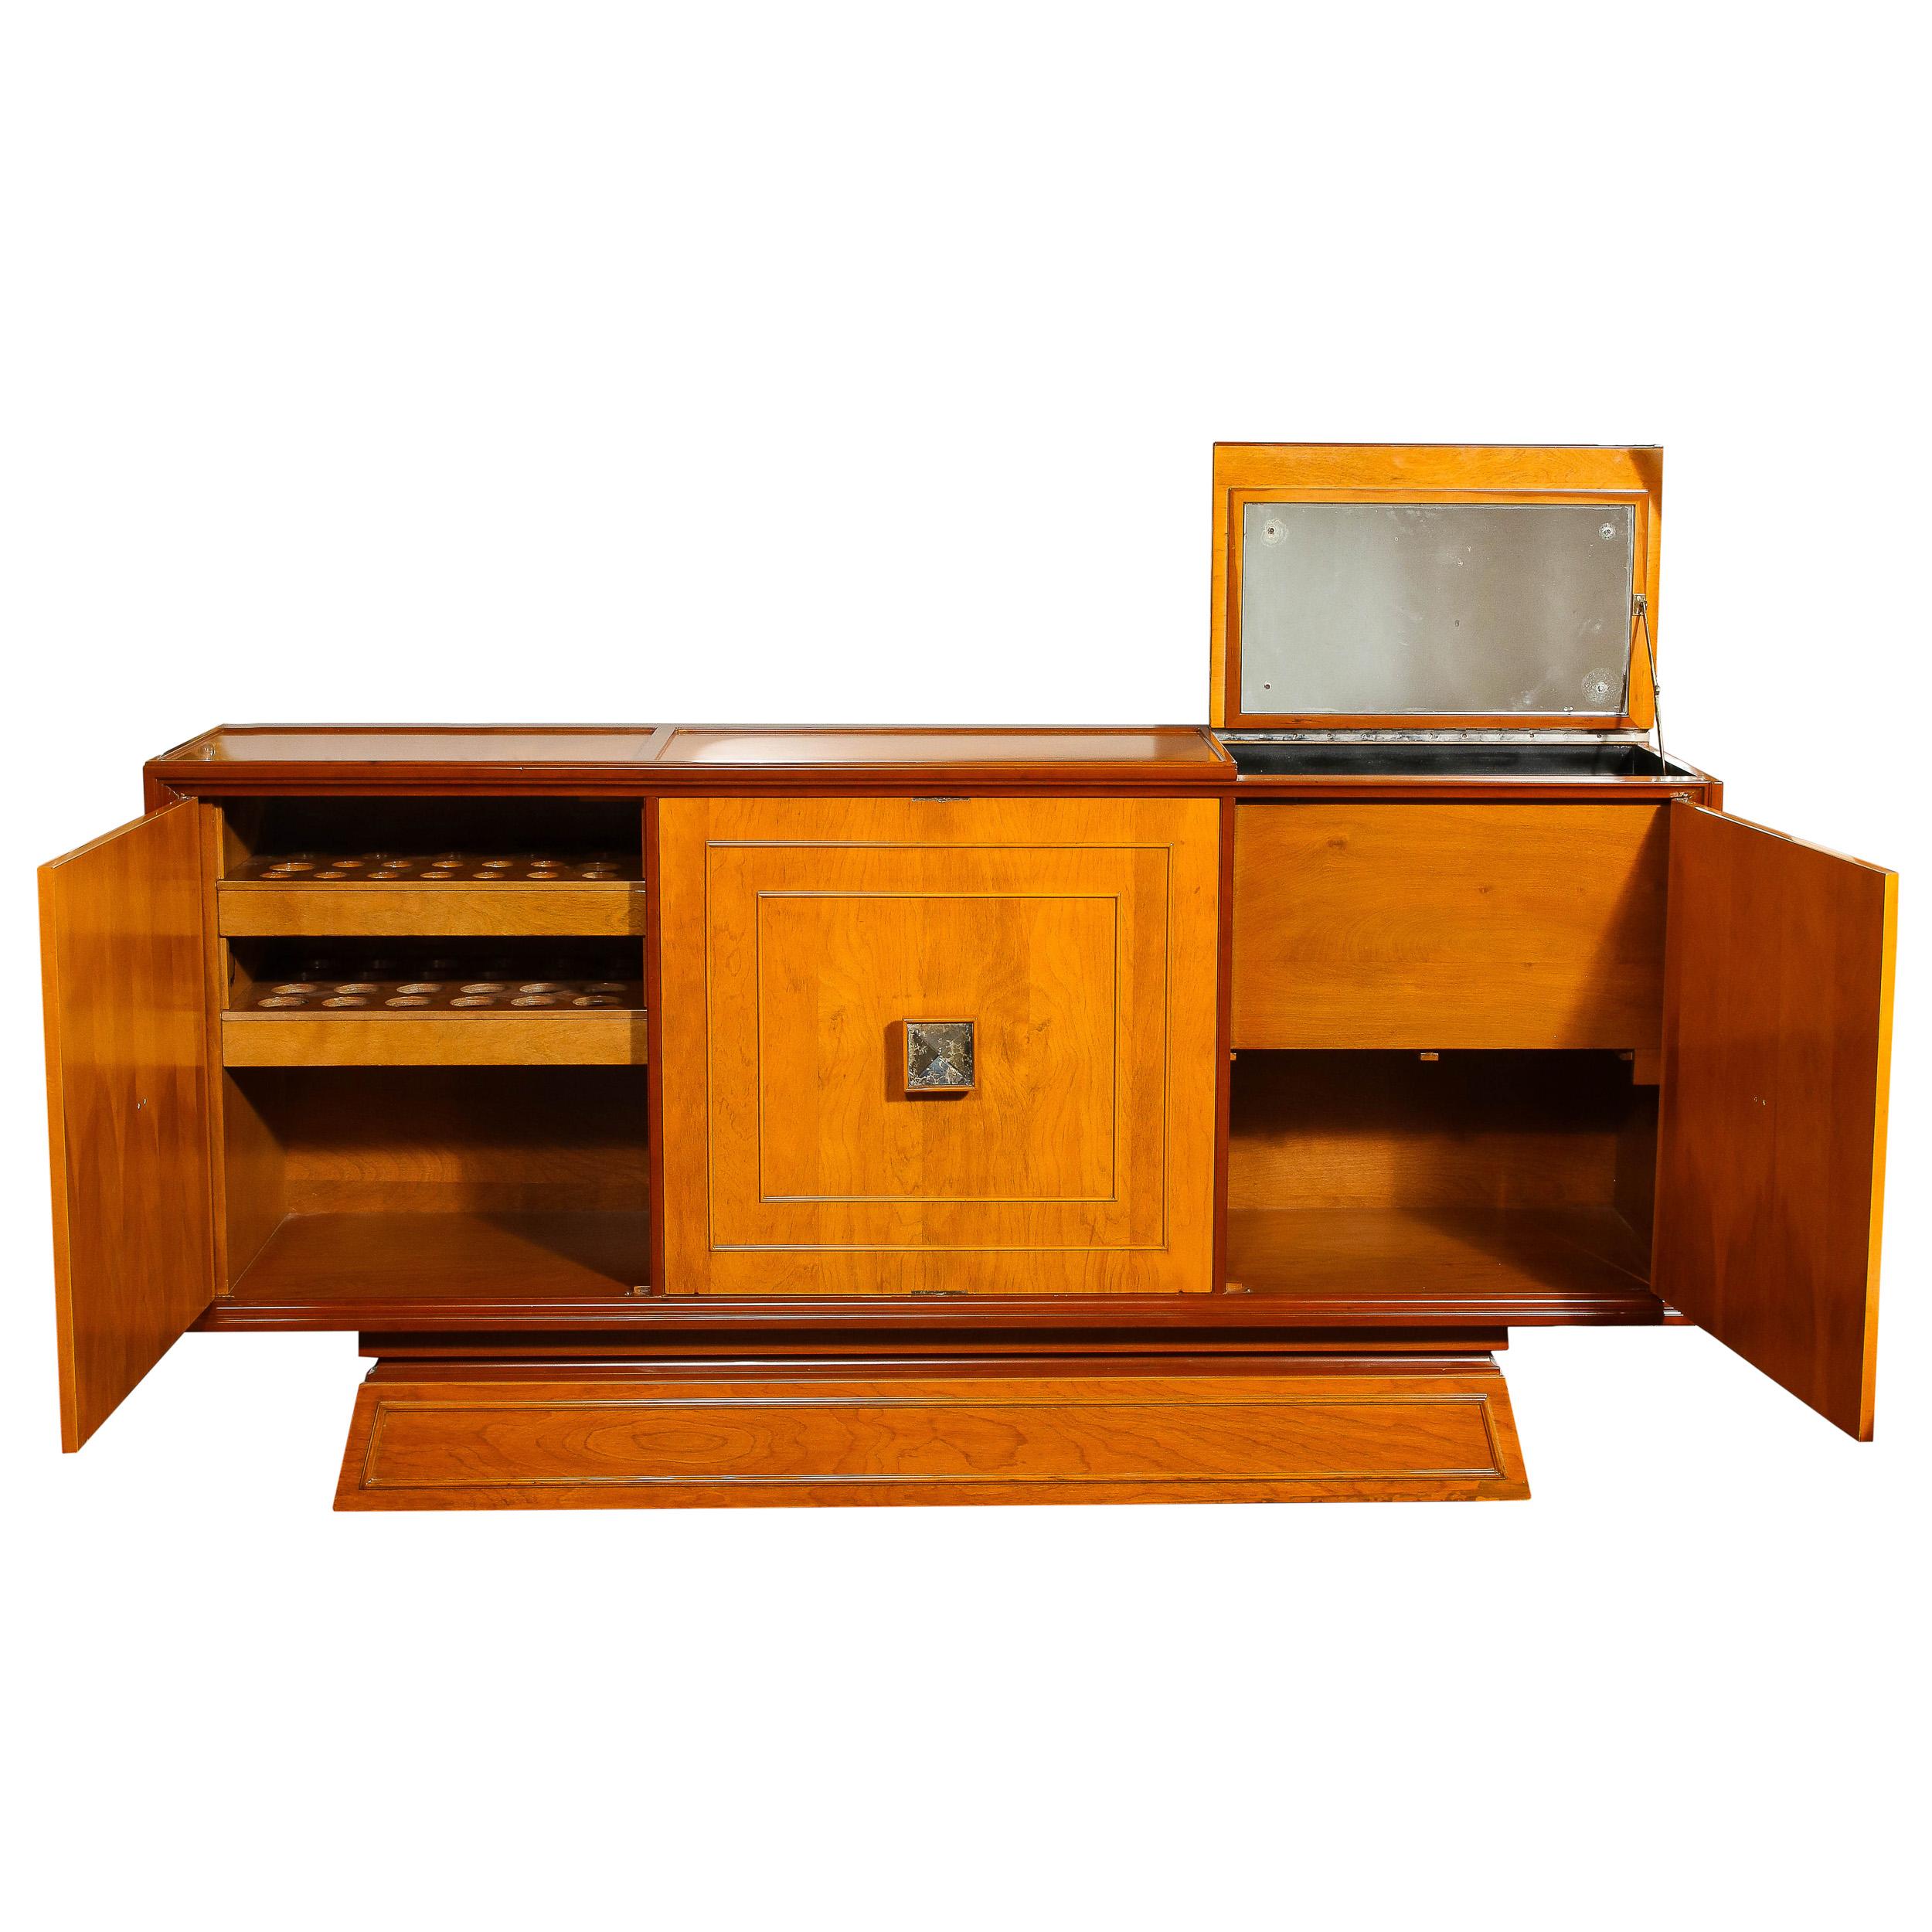 Mid-20th Century Mid-Century Modernist Bar Cabinet in Book-Matched Walnut with Inset Glass Pulls For Sale